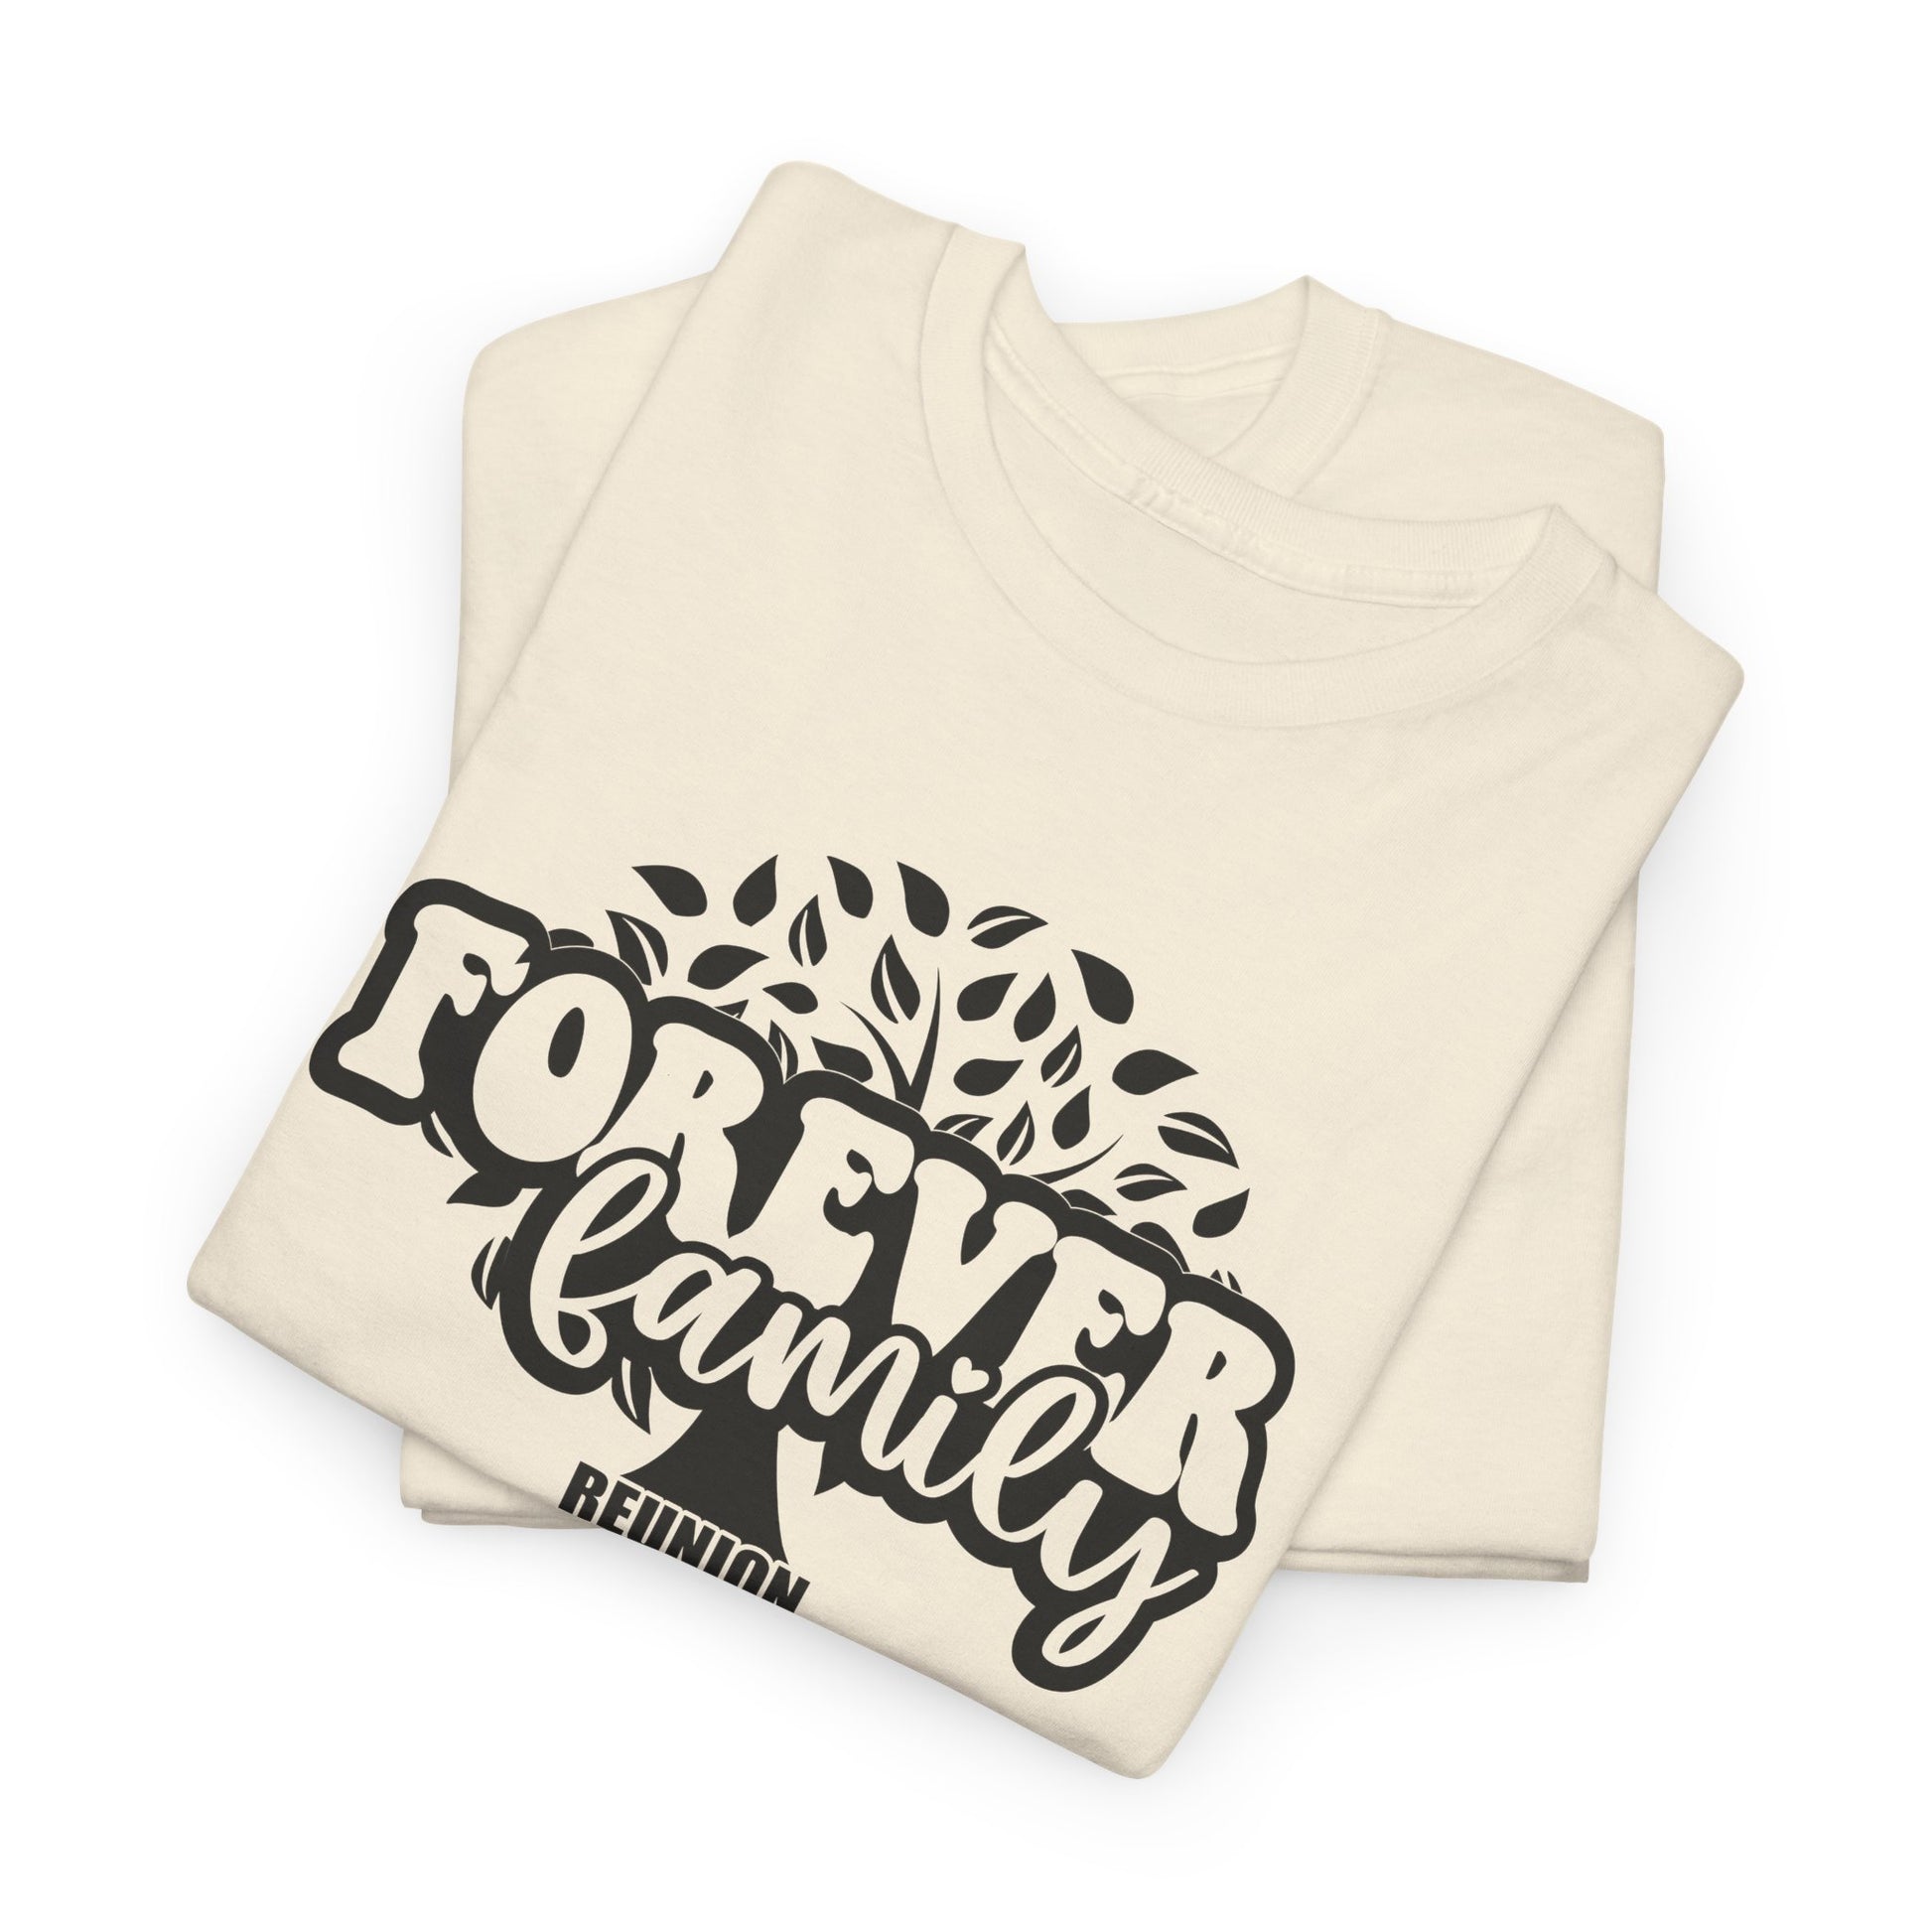 Forever Family - Craftee Designs & Prints 